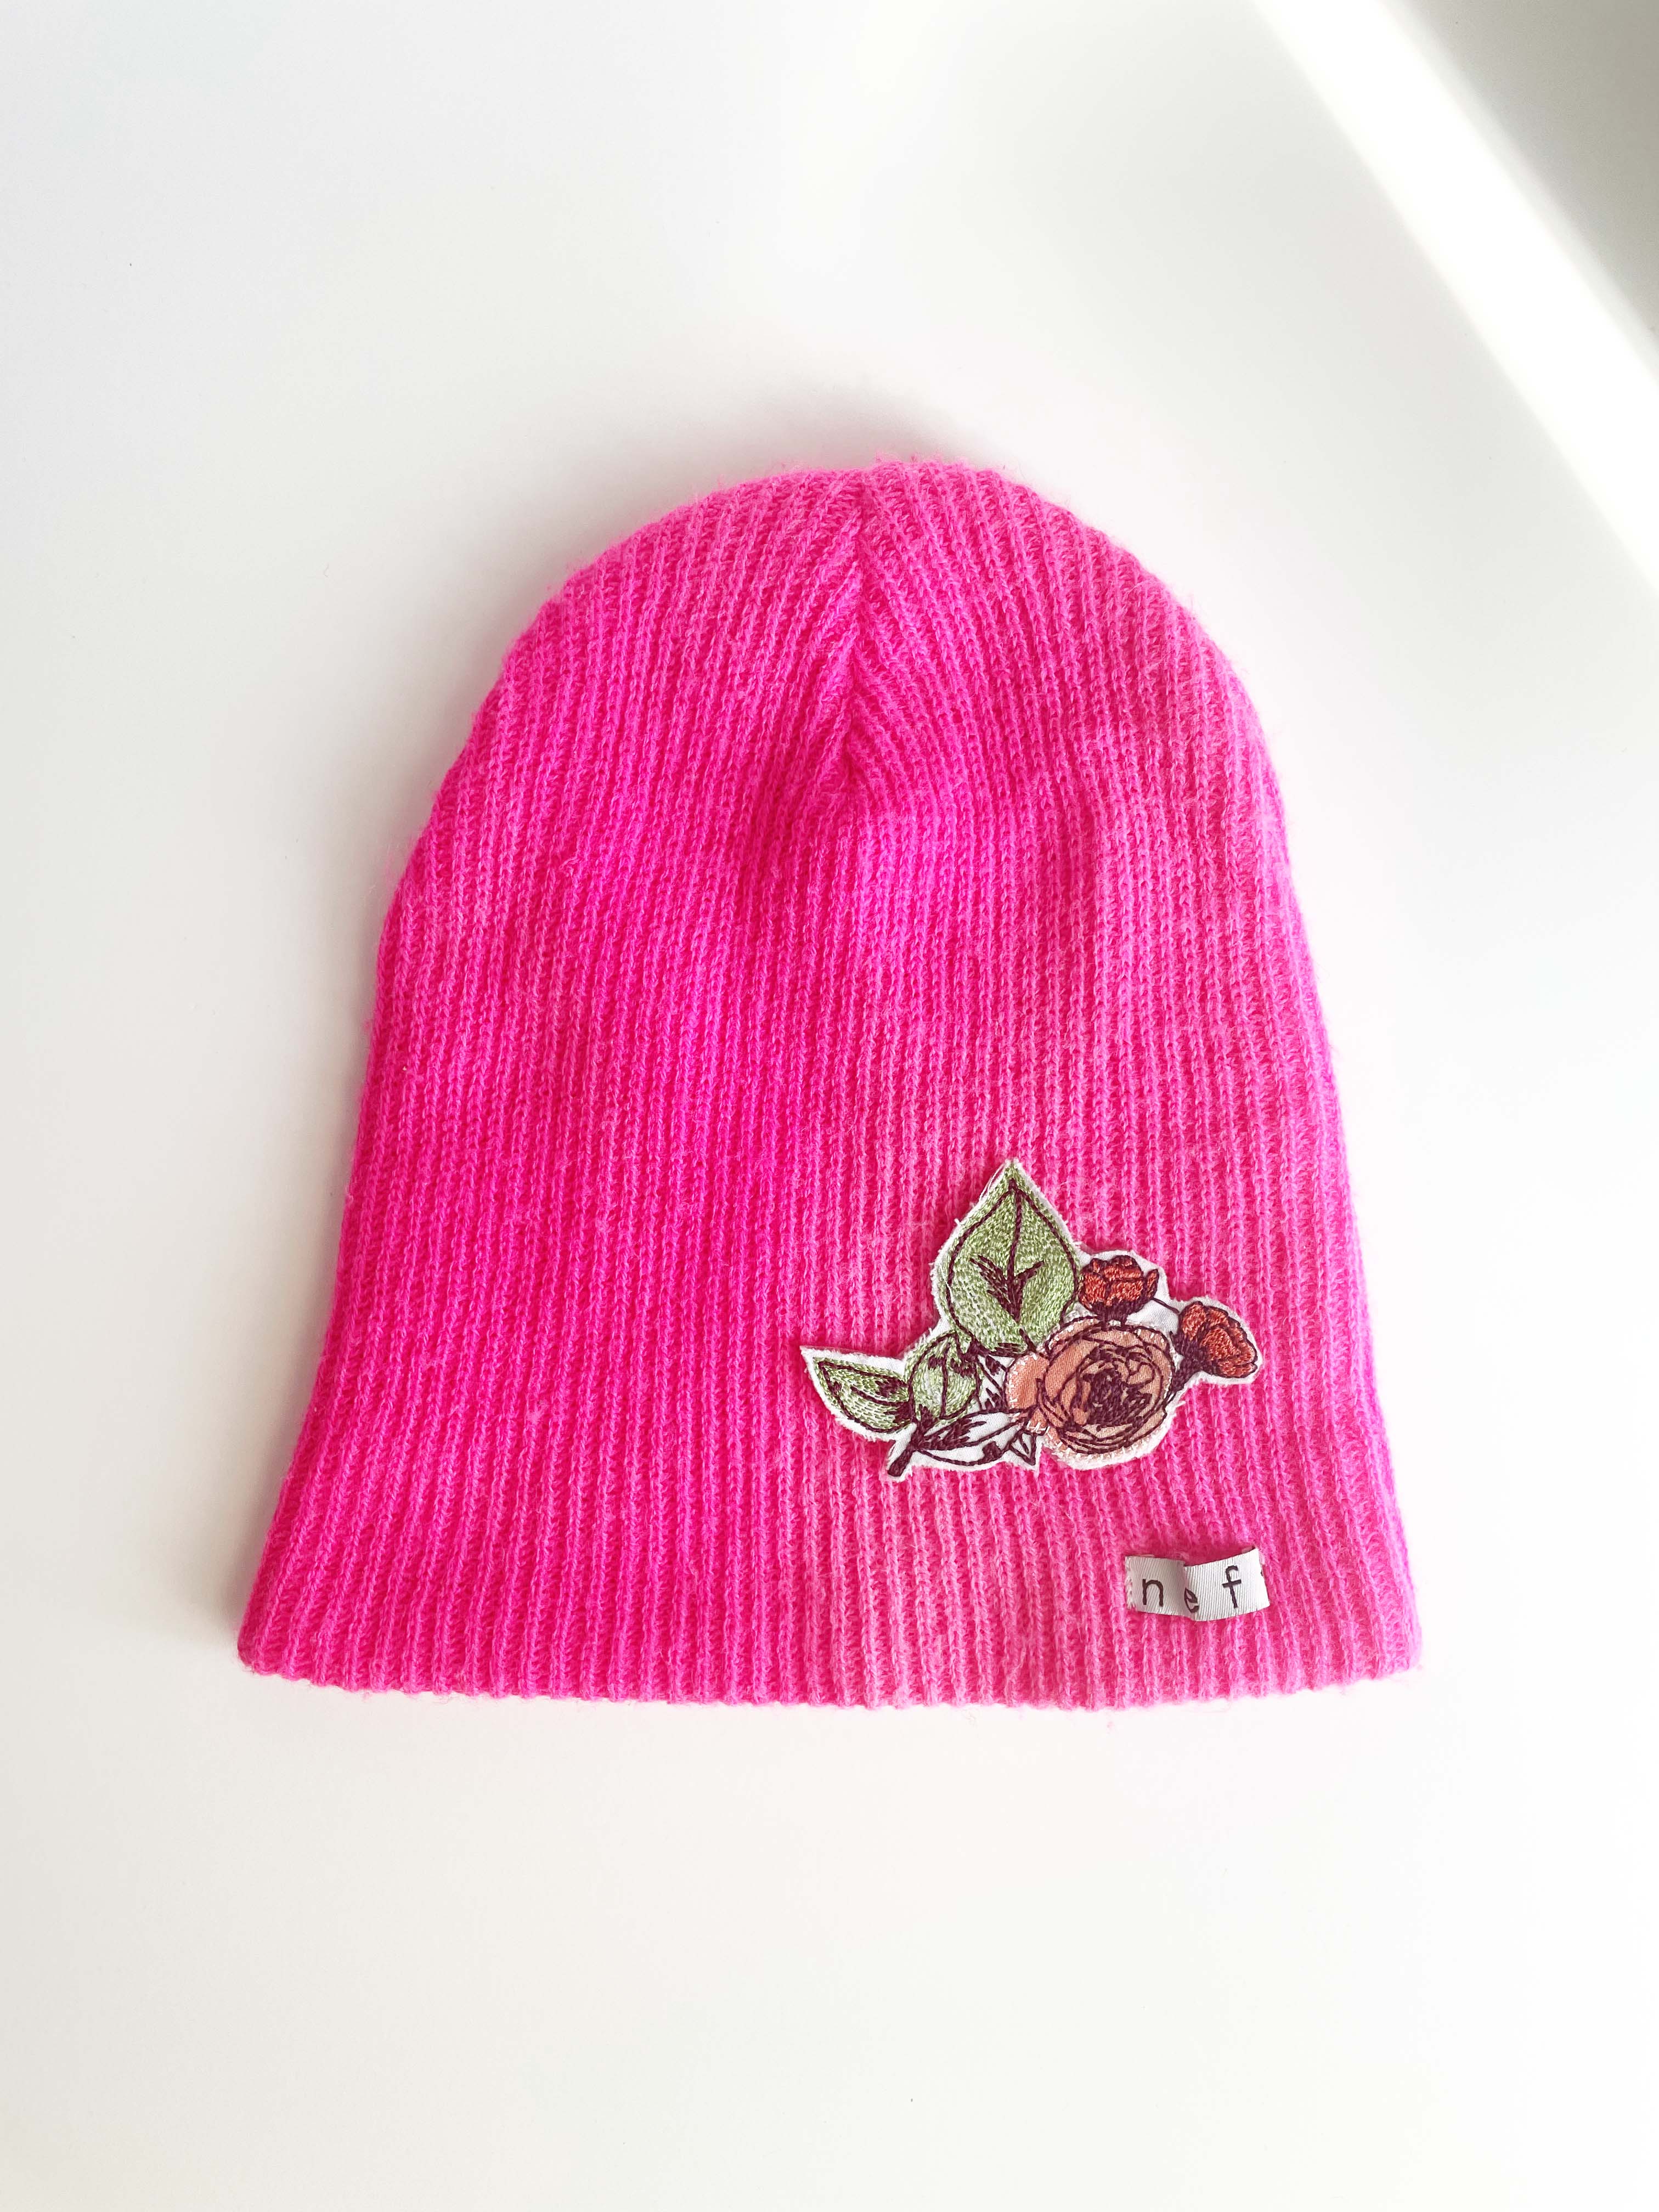 Hot pink knit hat with rose bush applique on bottom right. 